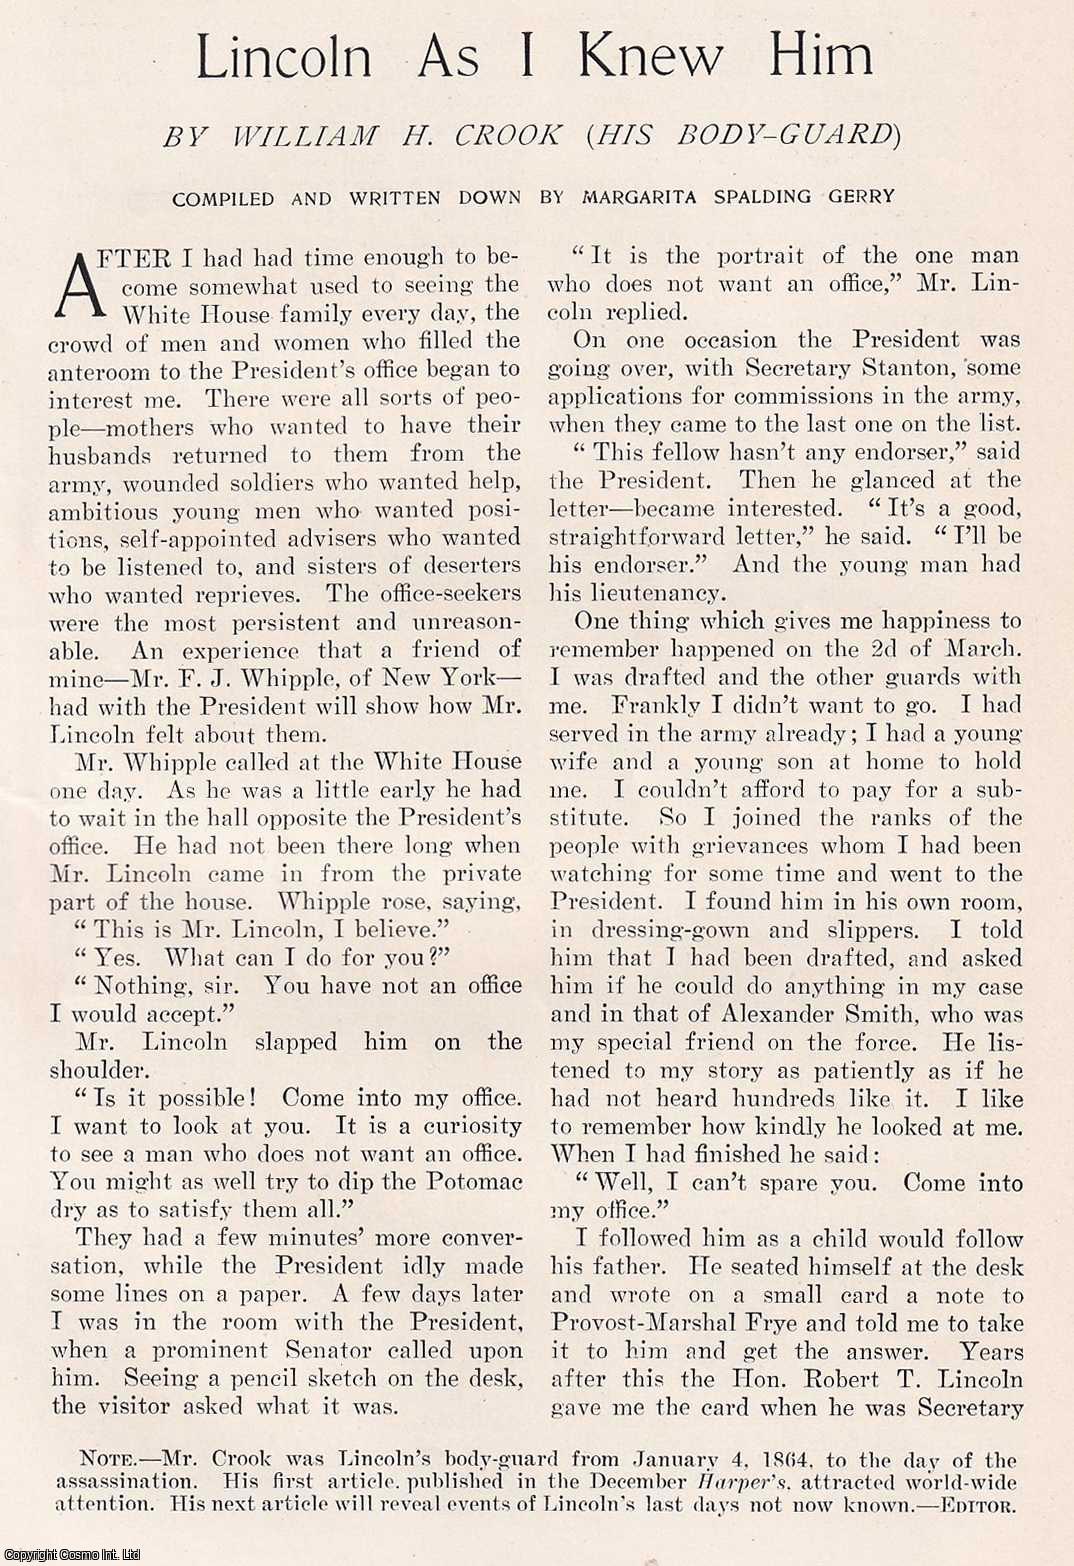 MURDER OF ABRAHAM LINCOLN - Lincoln As I Knew Him. By his Bodguard, William H. Crook. An original article from the Harper's Monthly Magazine, 1907.